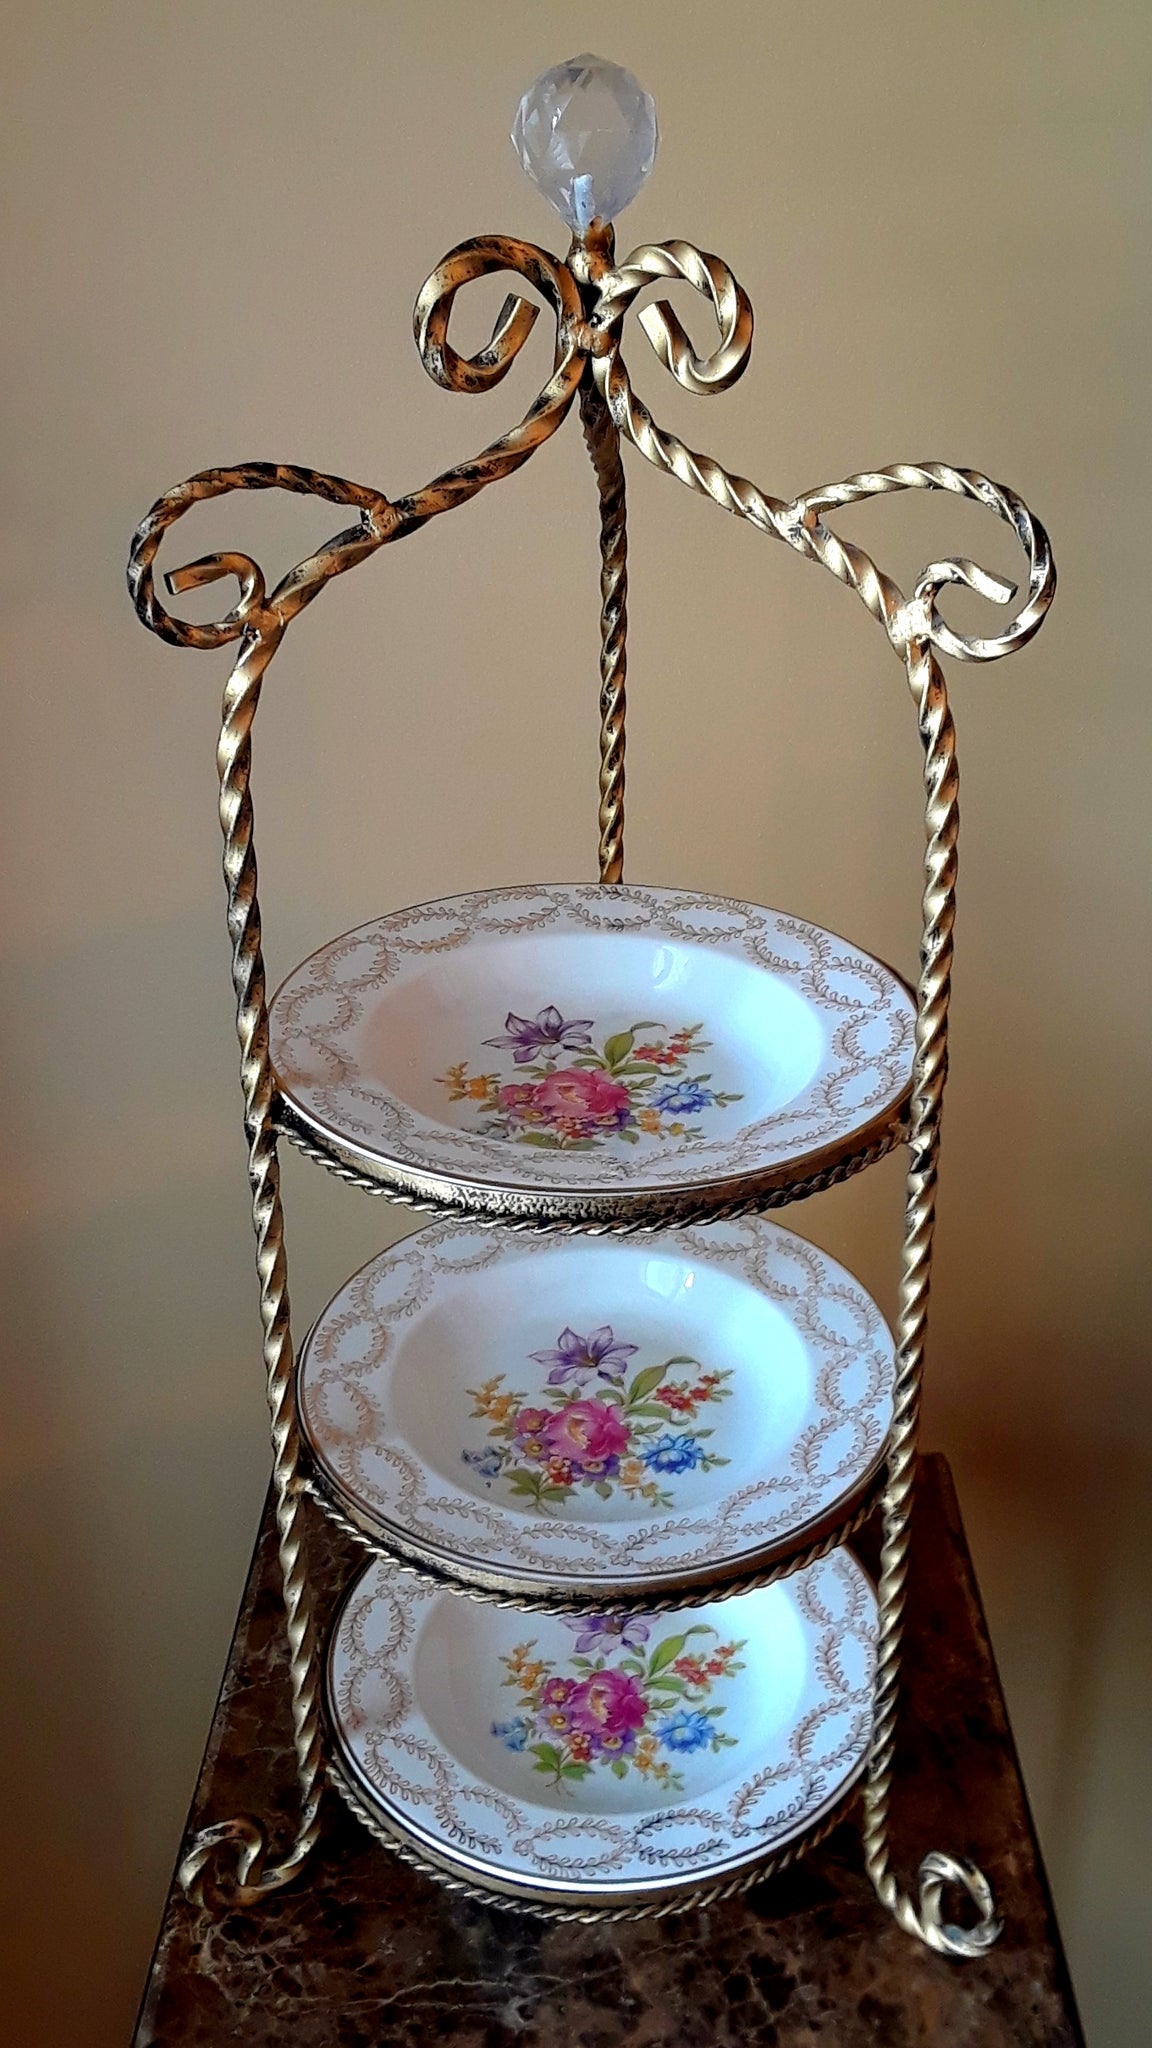 3-Tier Porcelain Bowl Stand Vintage Party Rentals with Royal Table Settings.